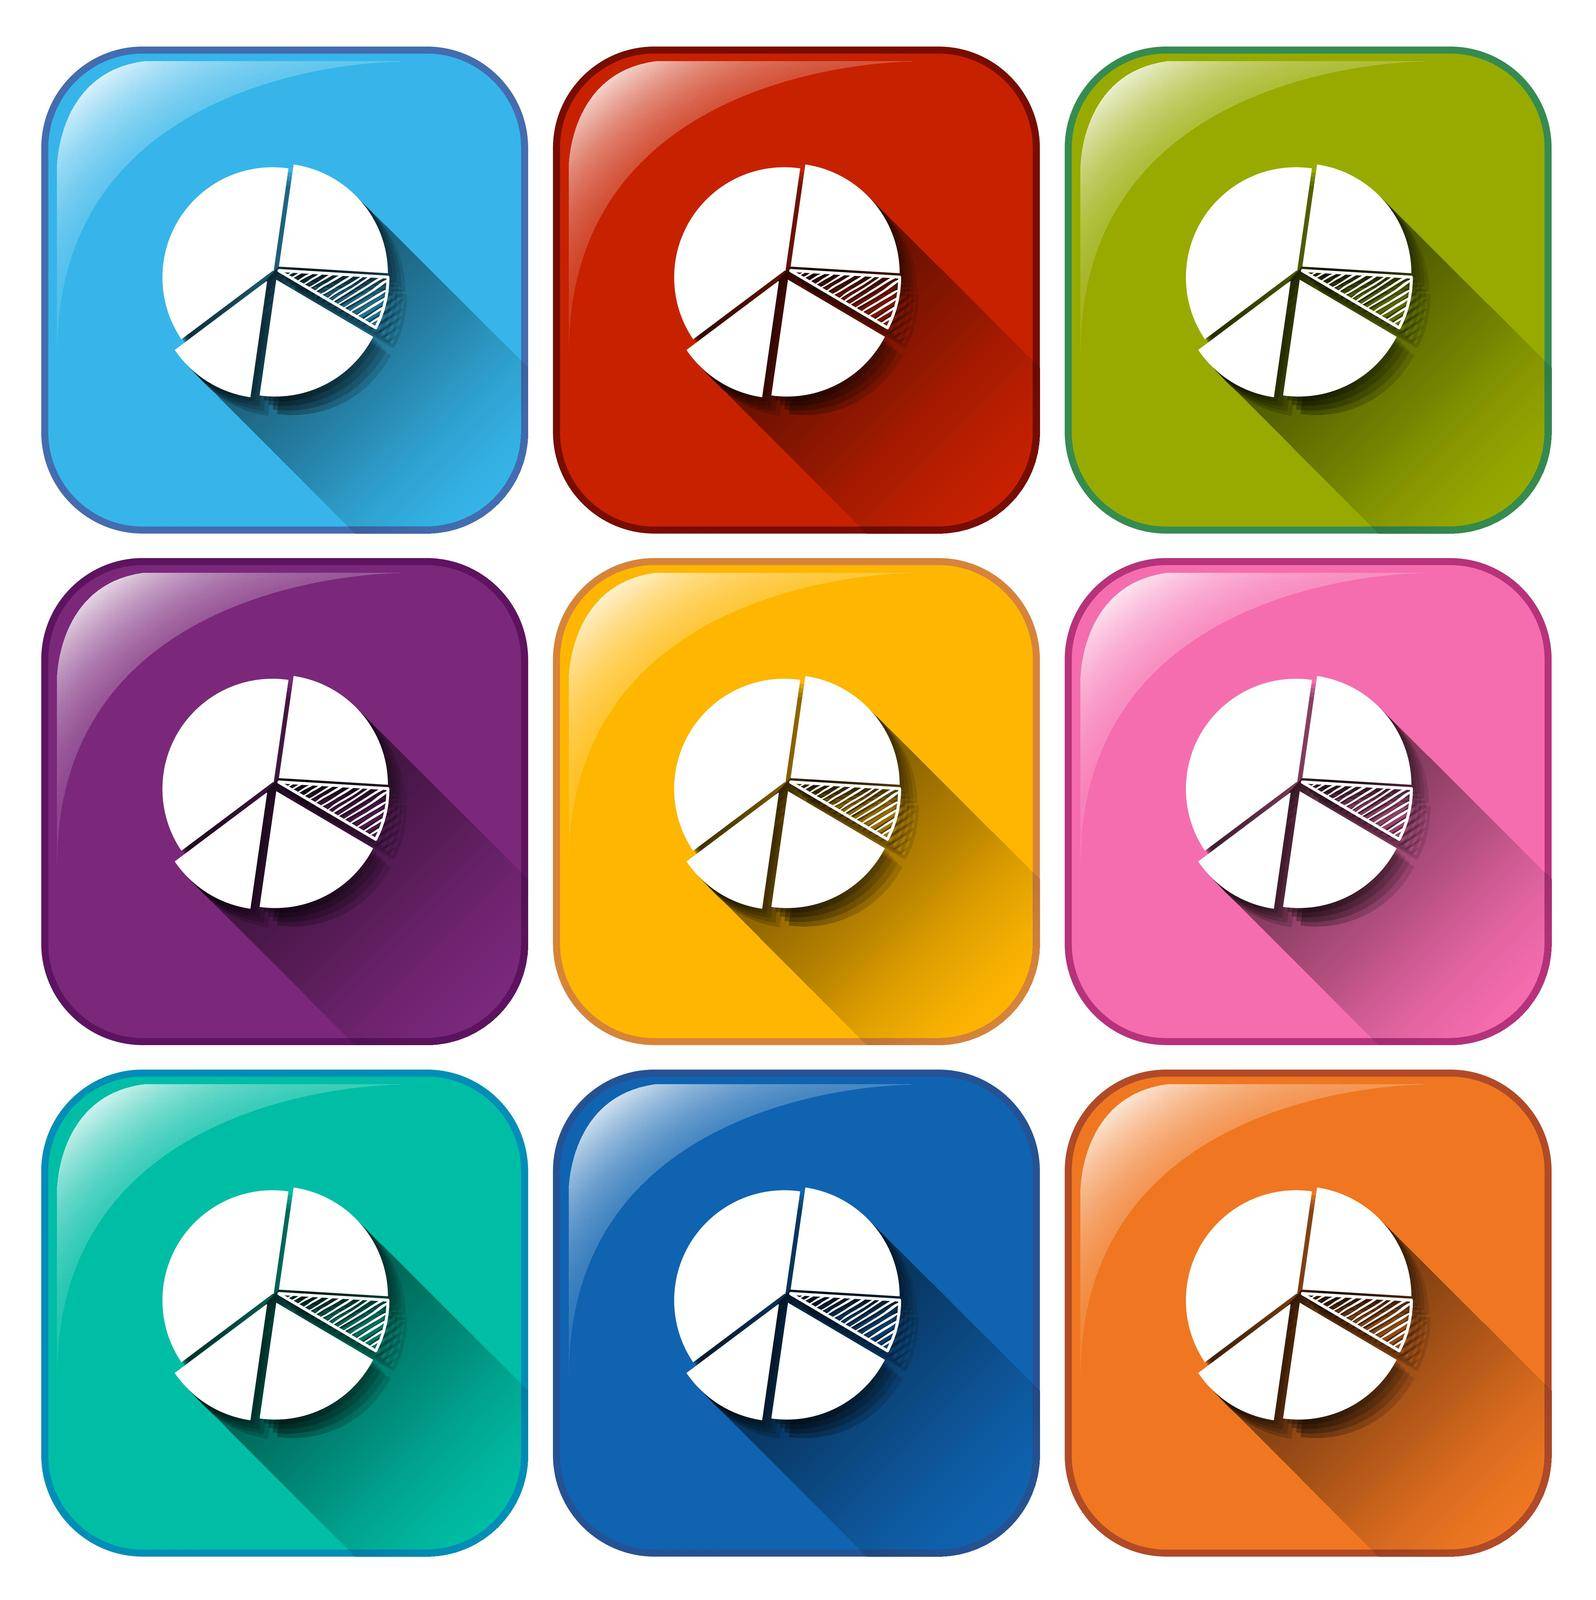 Rounded buttons with circular graphs on a white background